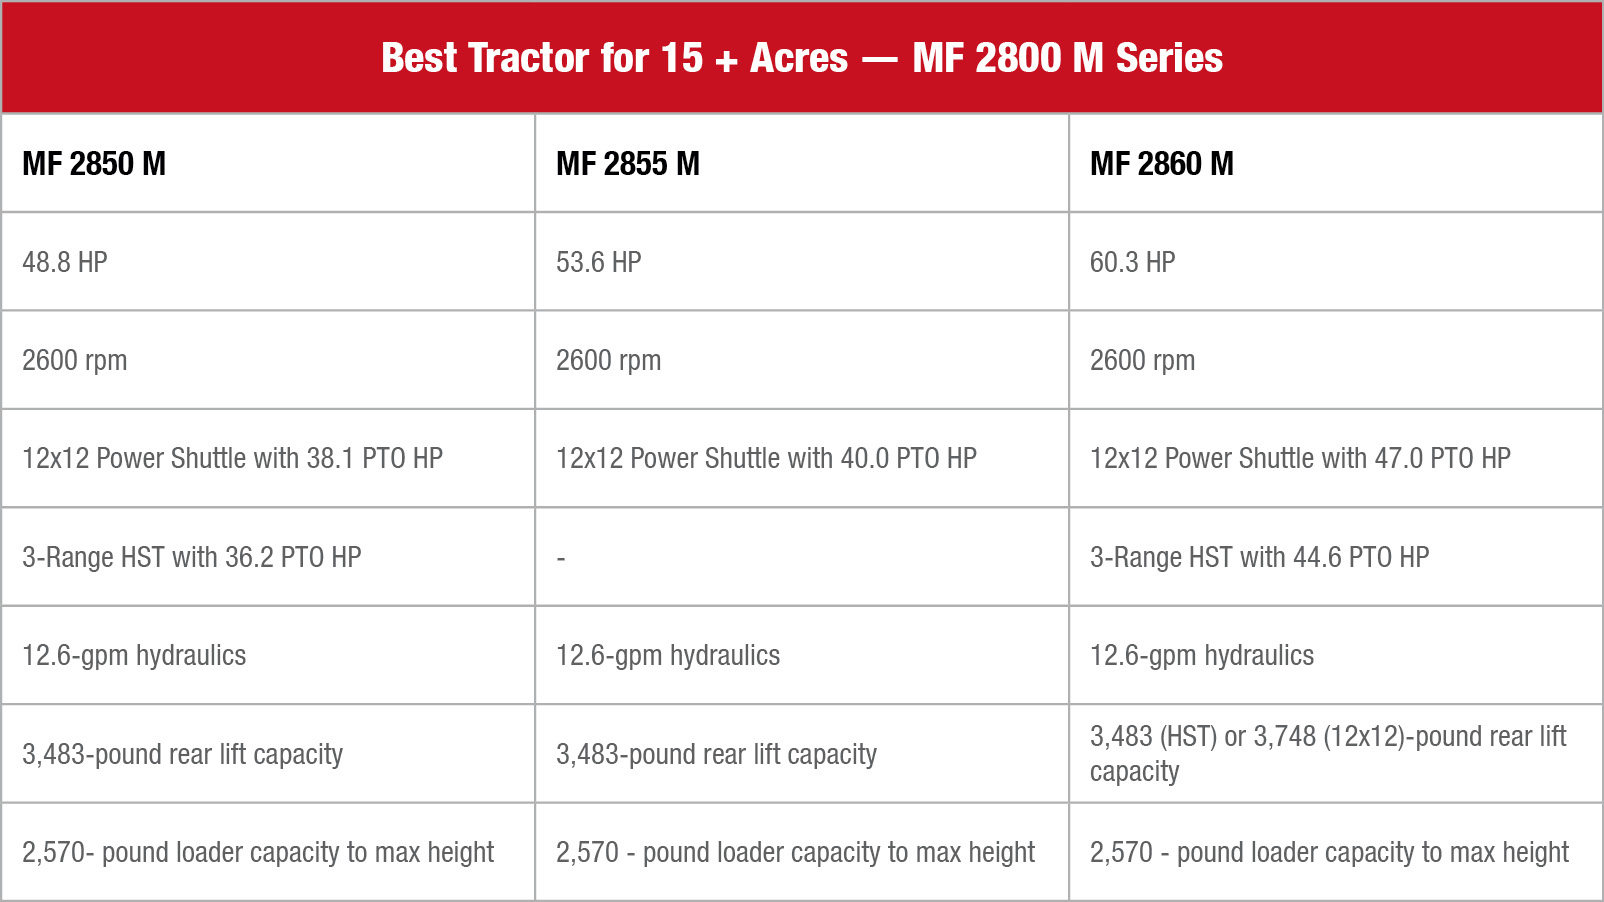 MF 2800 M Series Specifications